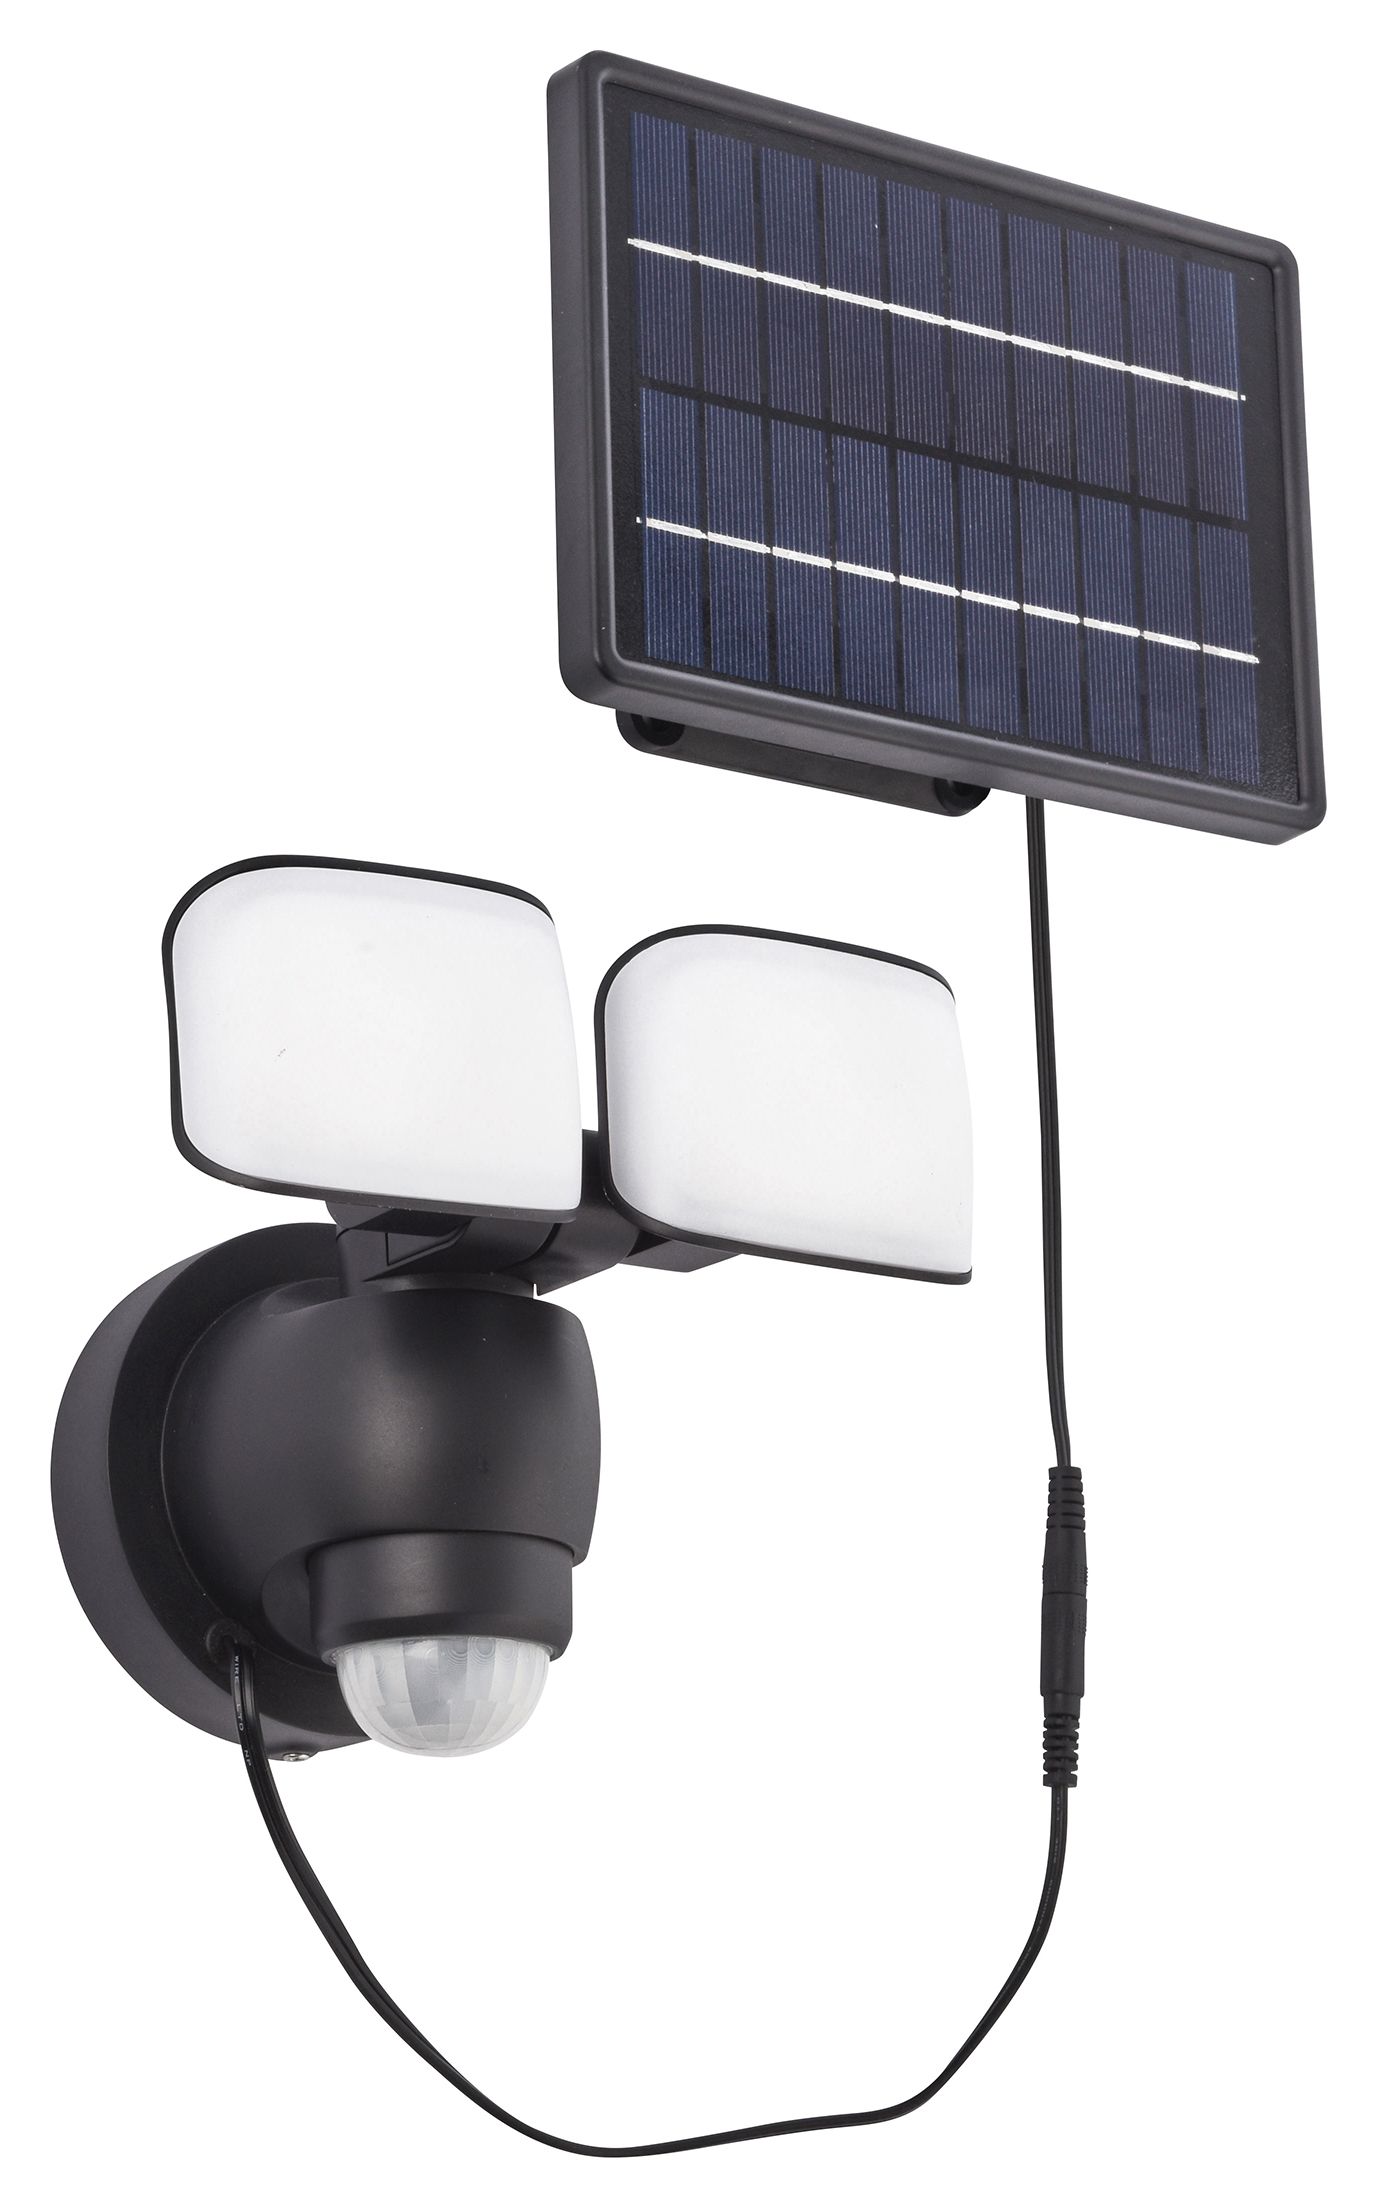 Image of Saxby Omega Solar Abs Plastic & Frosted Polycarbonate Outdoor Security Light - Black